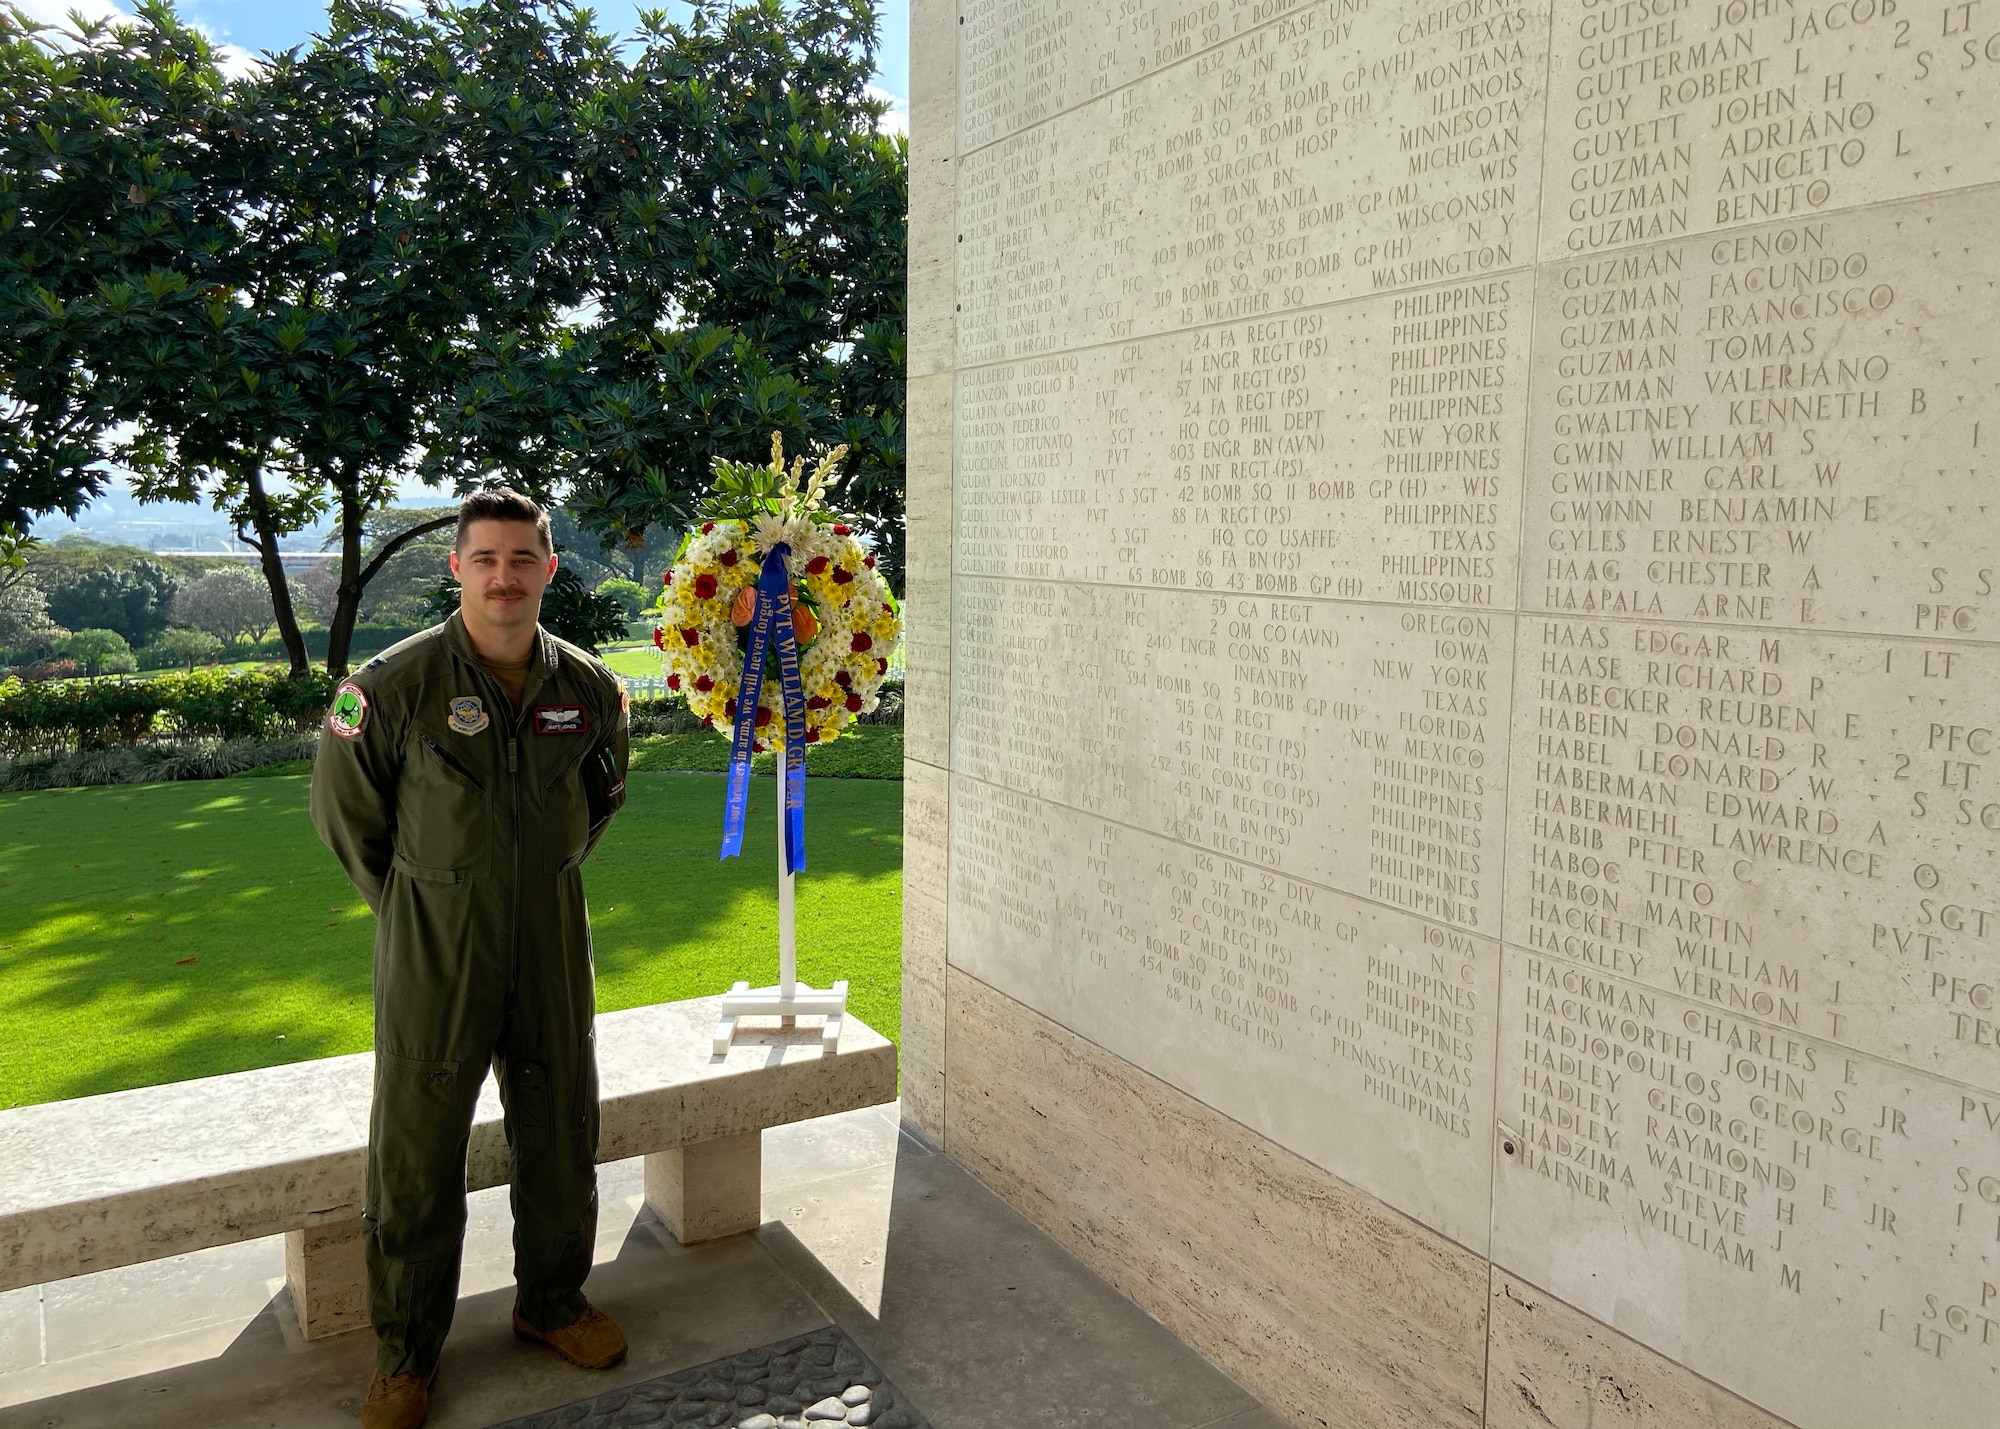 An Airman stands next to a wall with names on it.